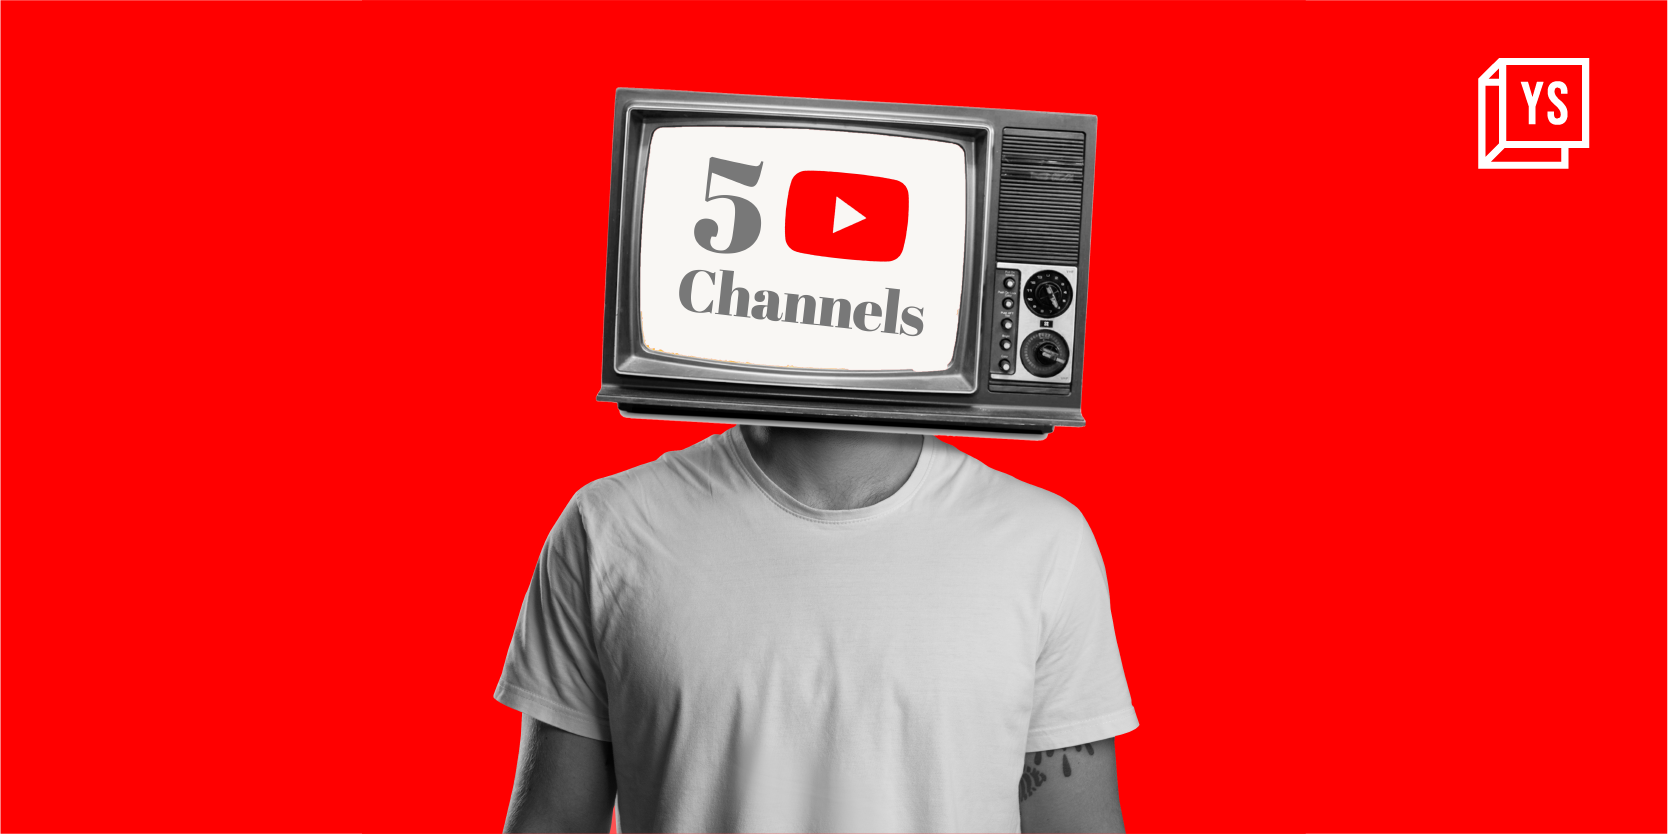 5 YouTube channels that can help you learn something this weekend